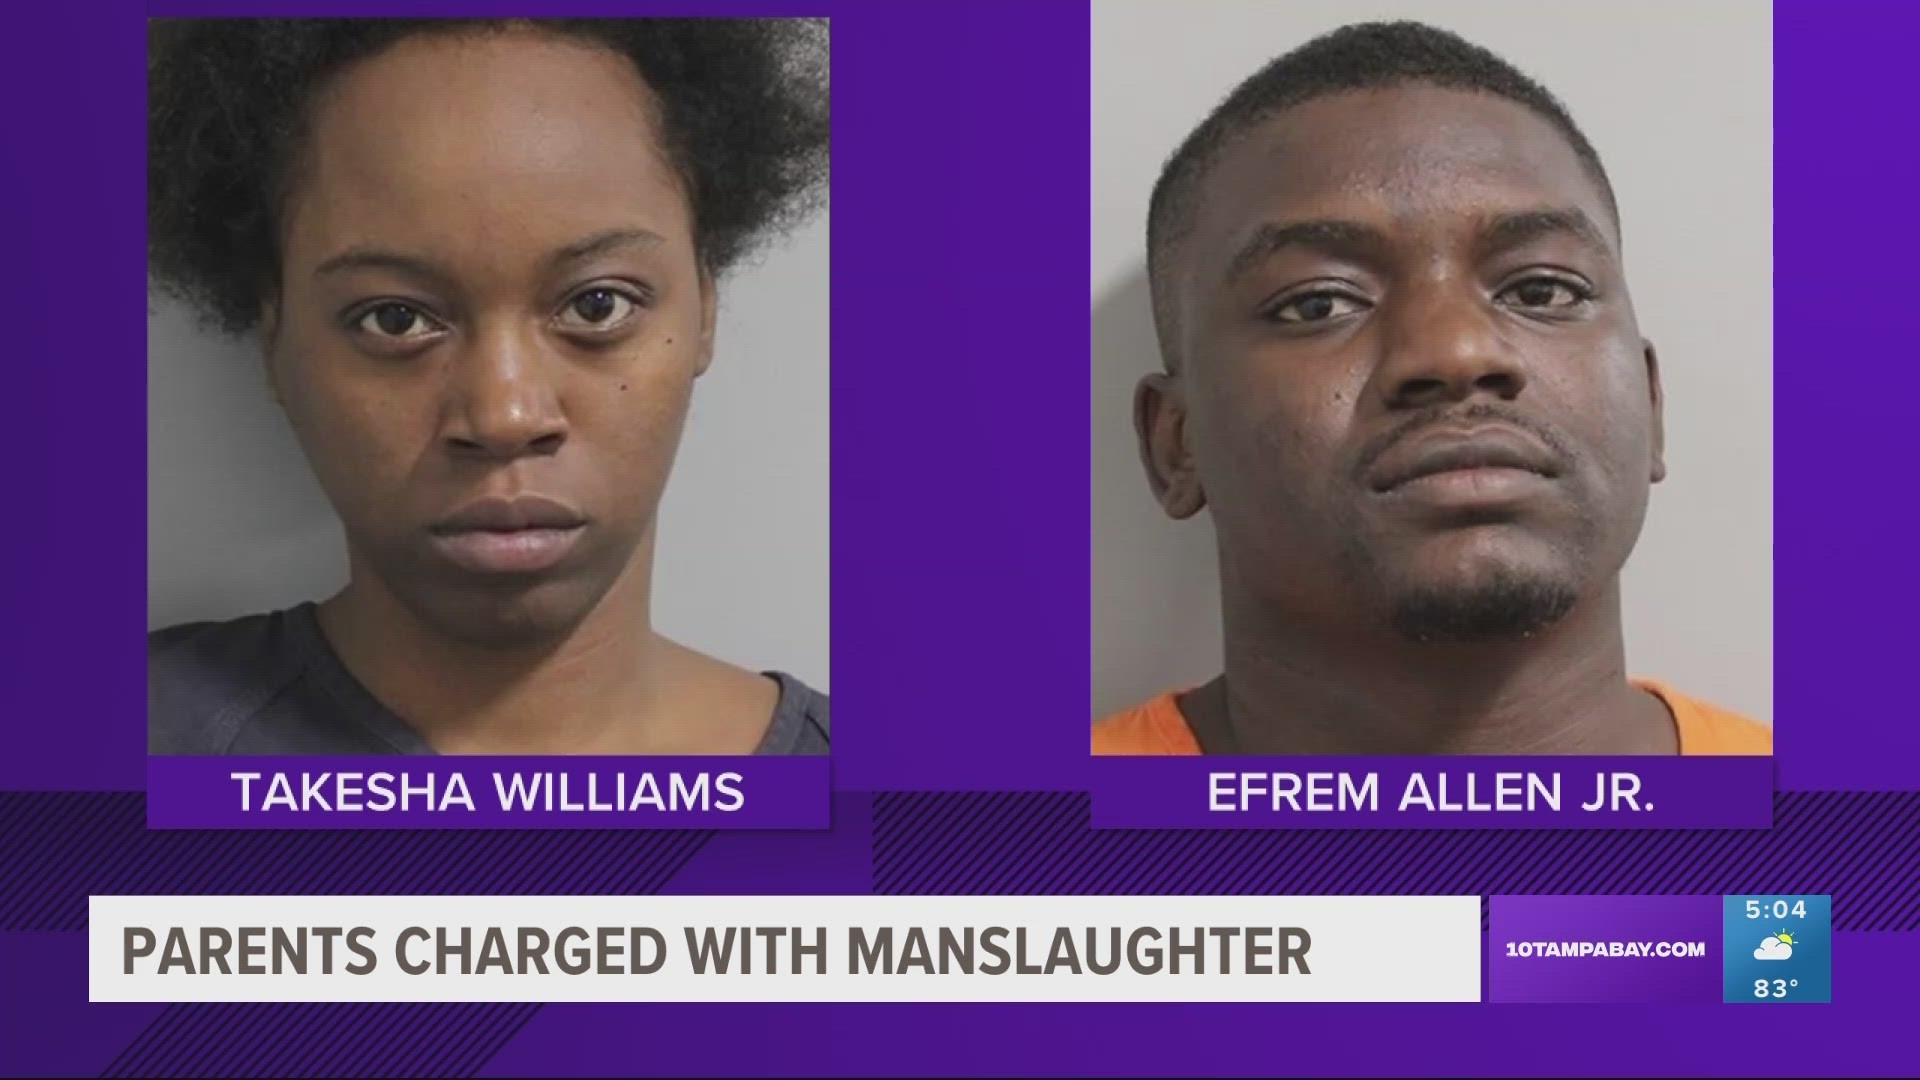 Takesha Williams, 24, and Efrem Allen Jr., 25, were charged with manslaughter after not calling for help as the 3-year-old's health declined.